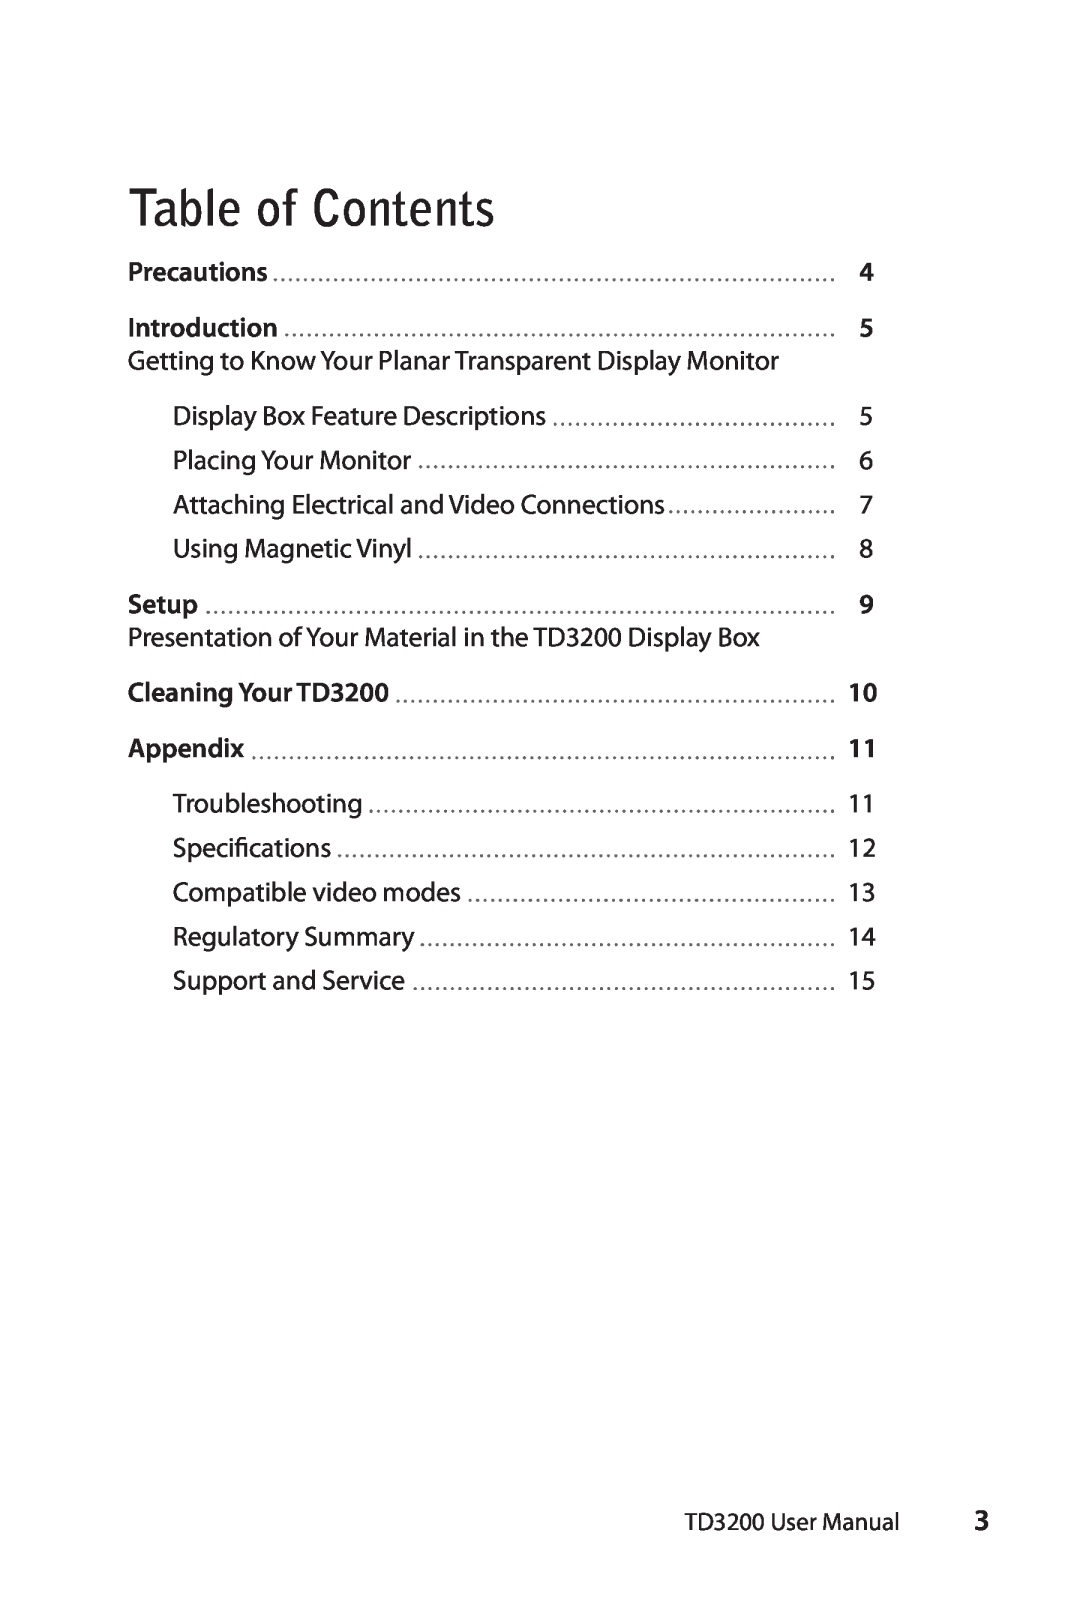 Planar user manual Table of Contents, Precautions, Introduction, Setup, Cleaning Your TD3200, Appendix 